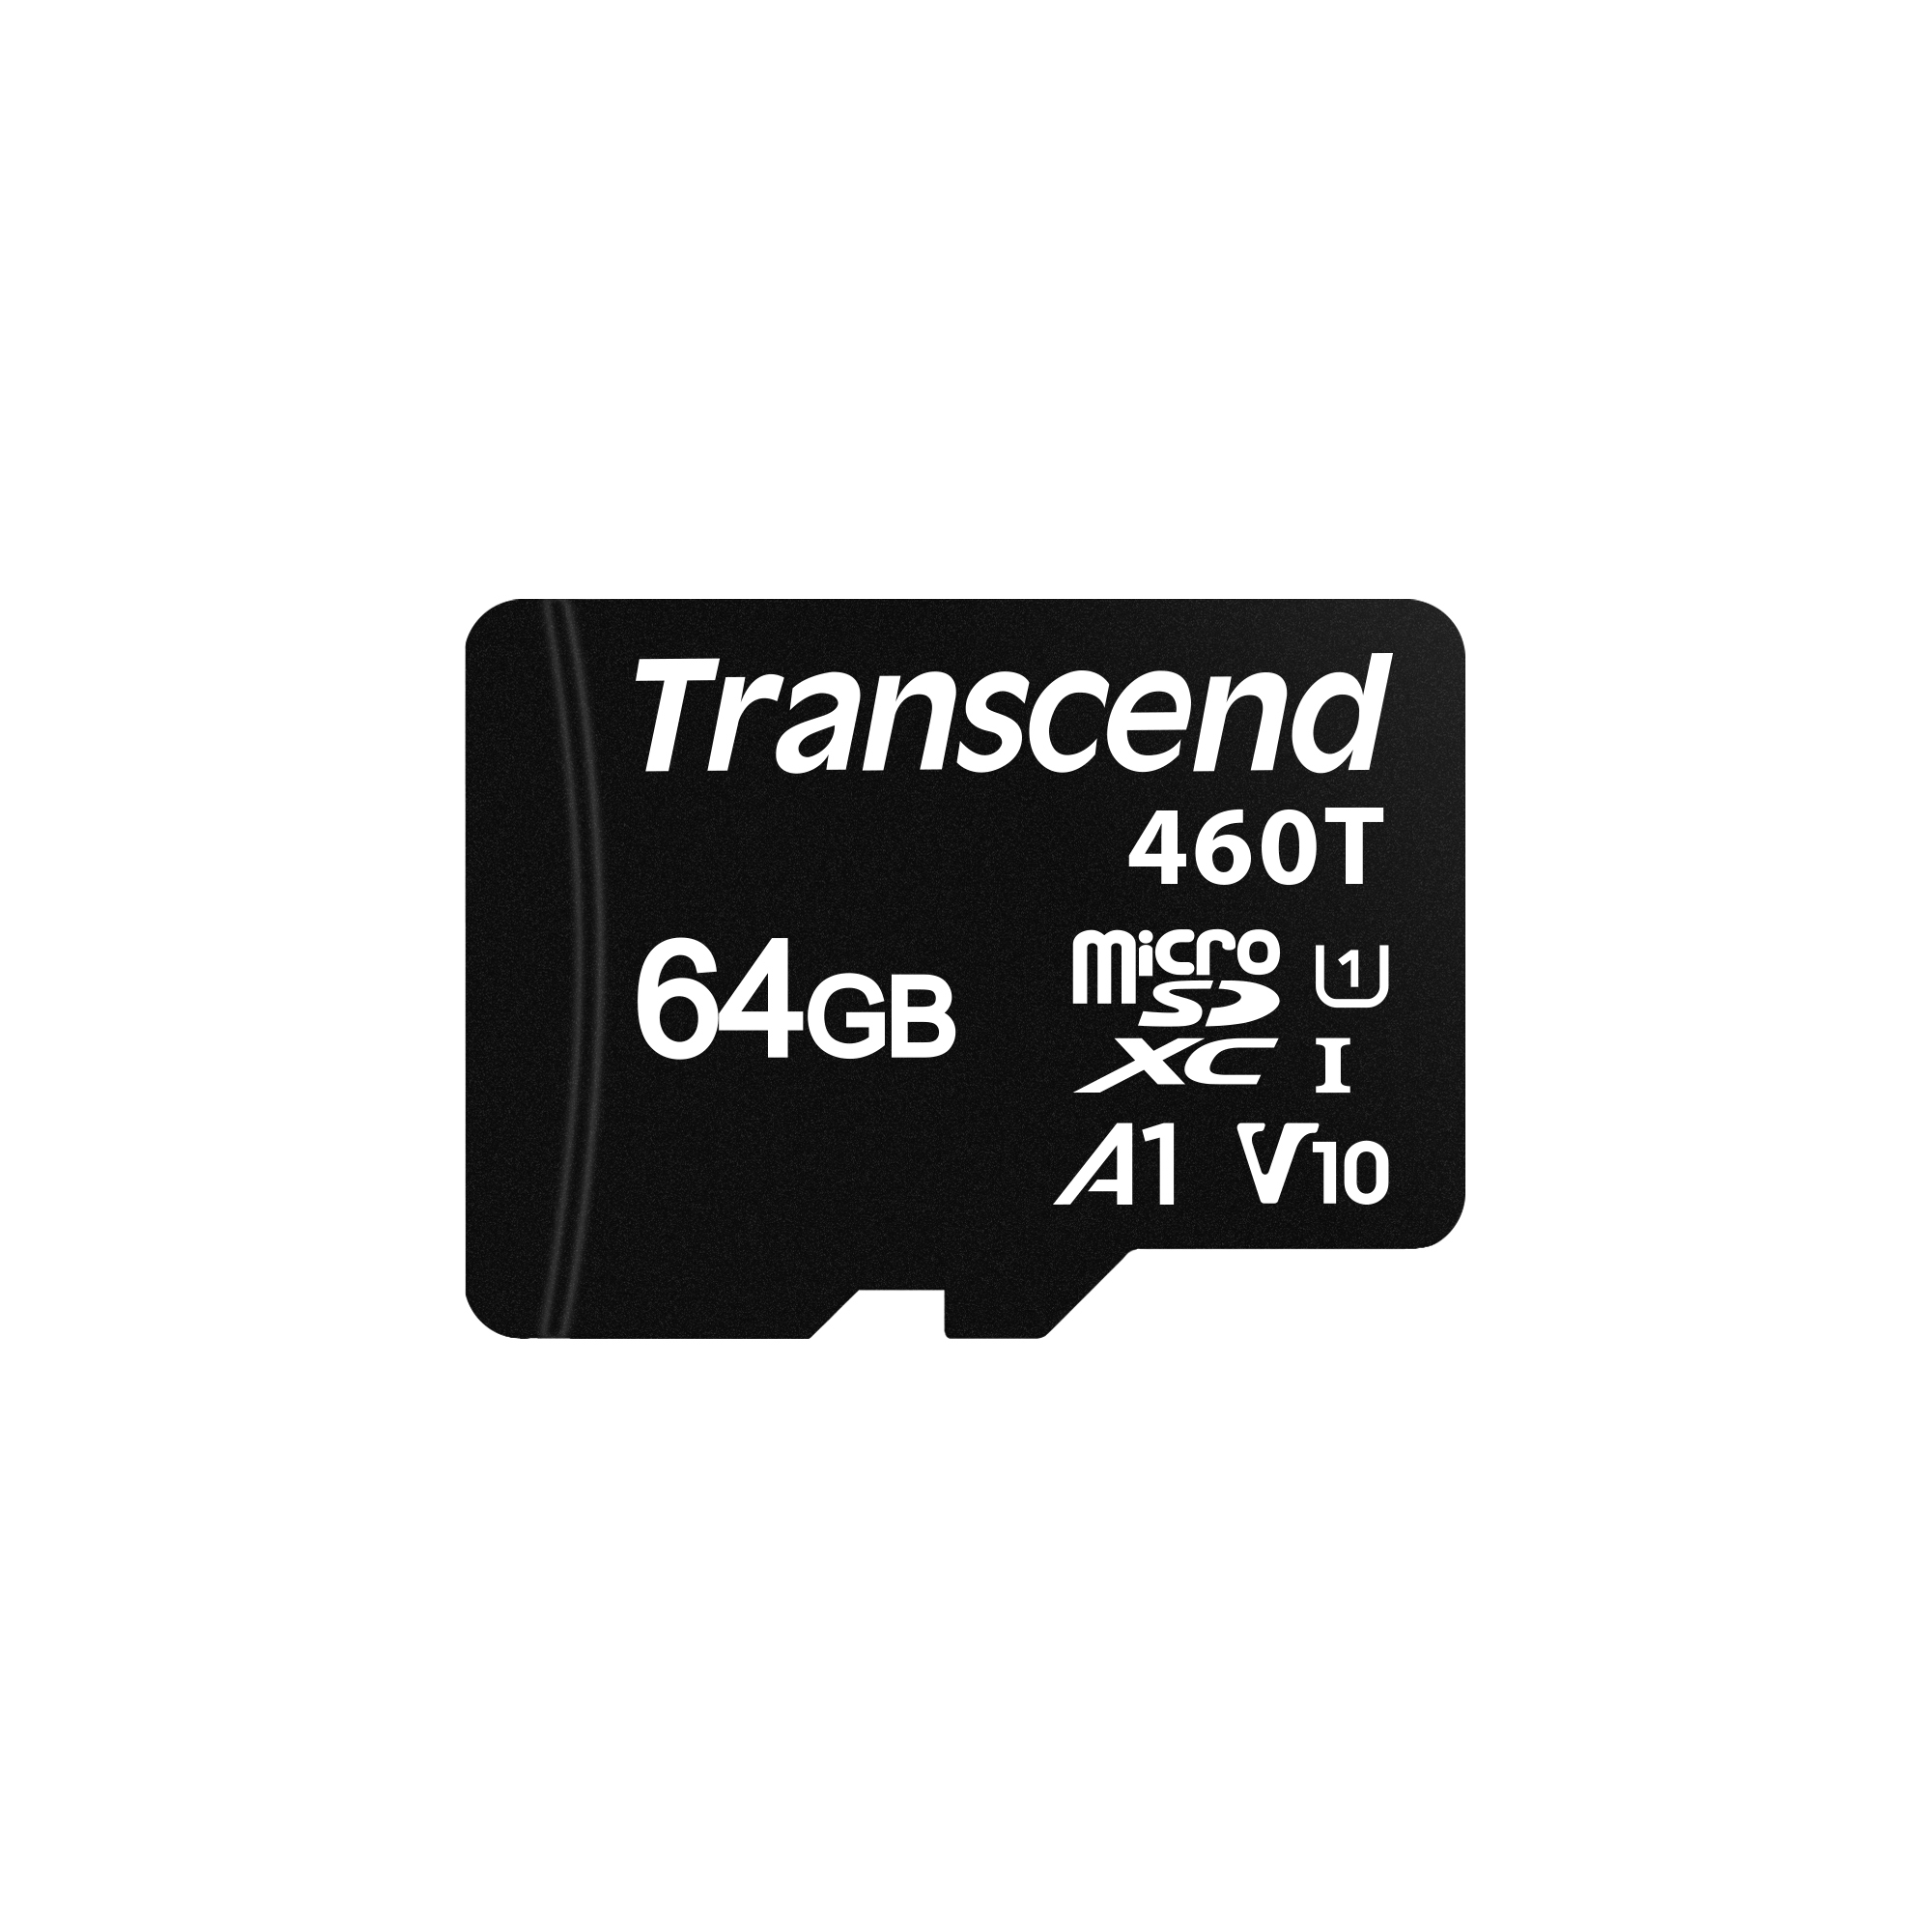 Transcend 64GB micro SD 460T embedded geheugenkaart